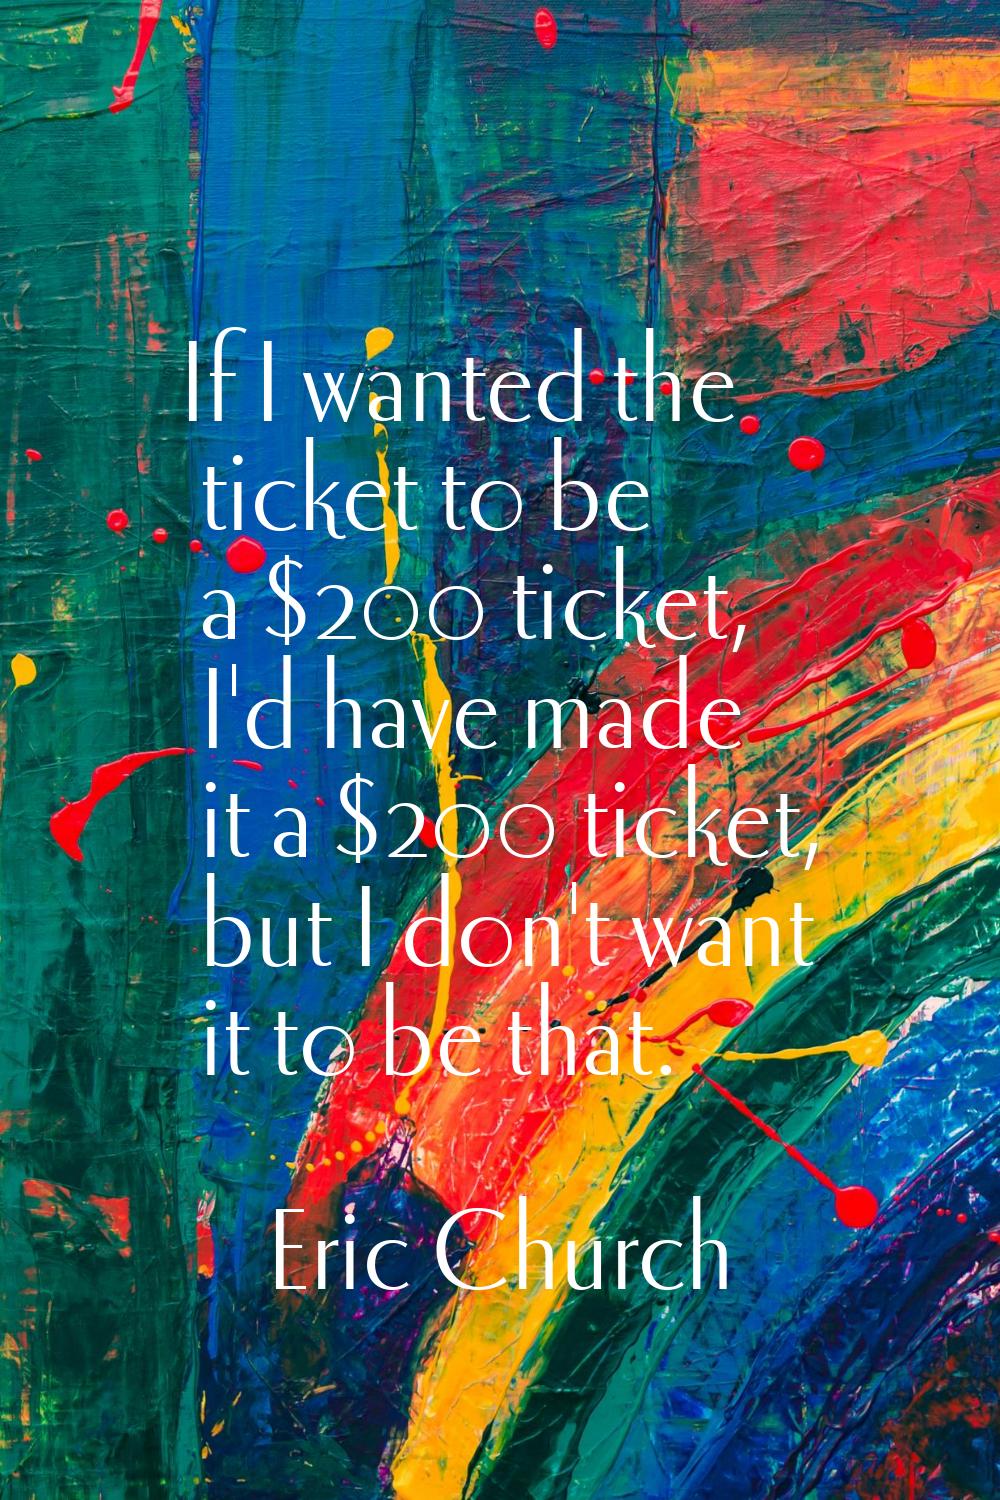 If I wanted the ticket to be a $200 ticket, I'd have made it a $200 ticket, but I don't want it to 